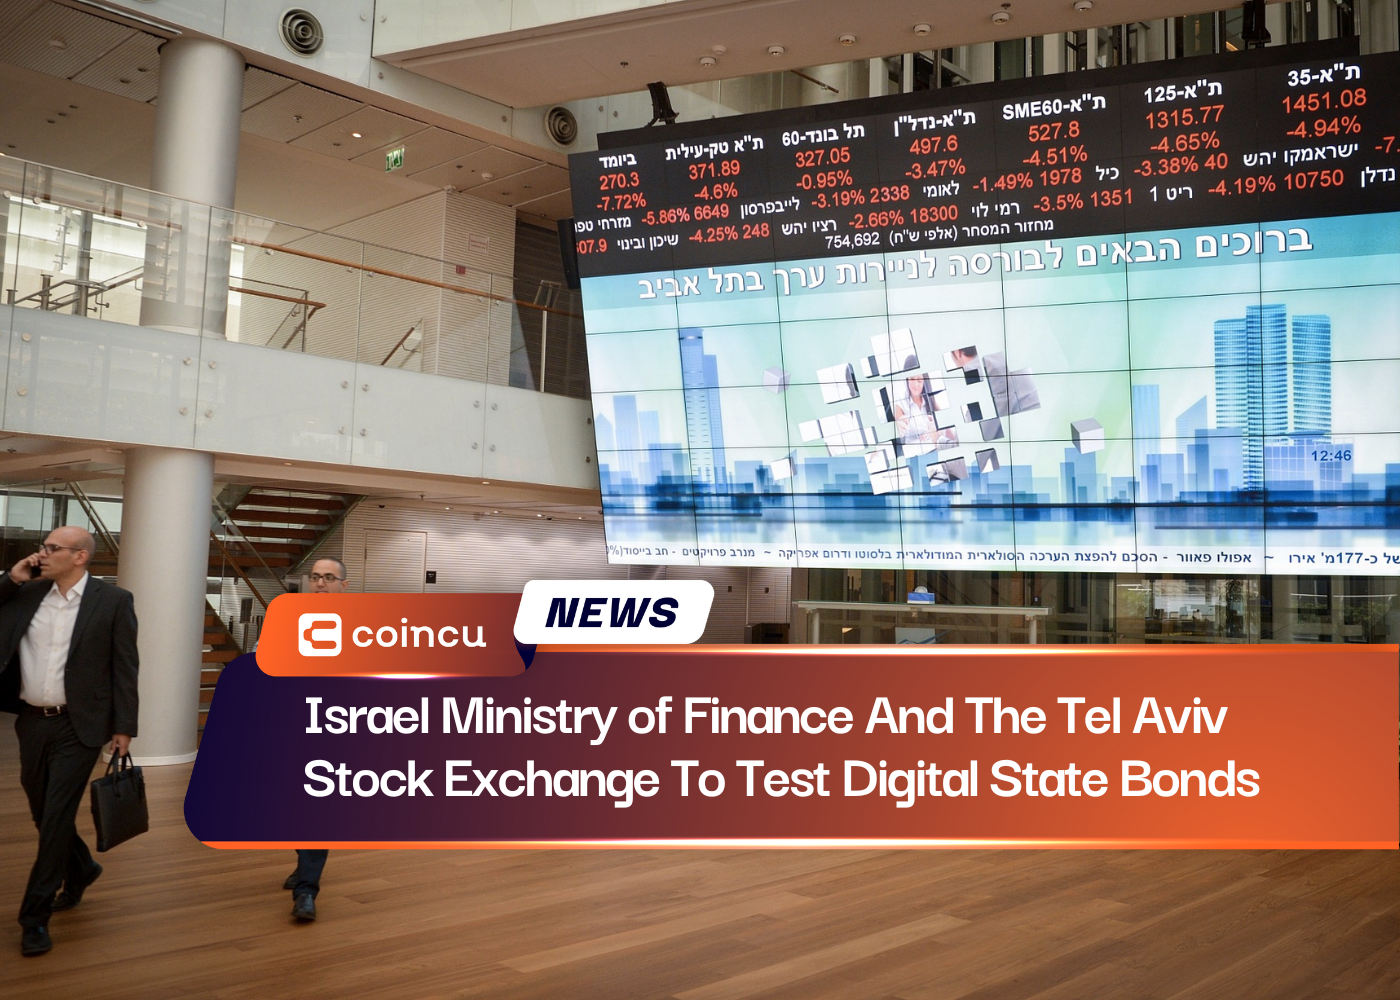 Israel Ministry of Finance And The Tel Aviv Stock Exchange To Test Digital State Bonds